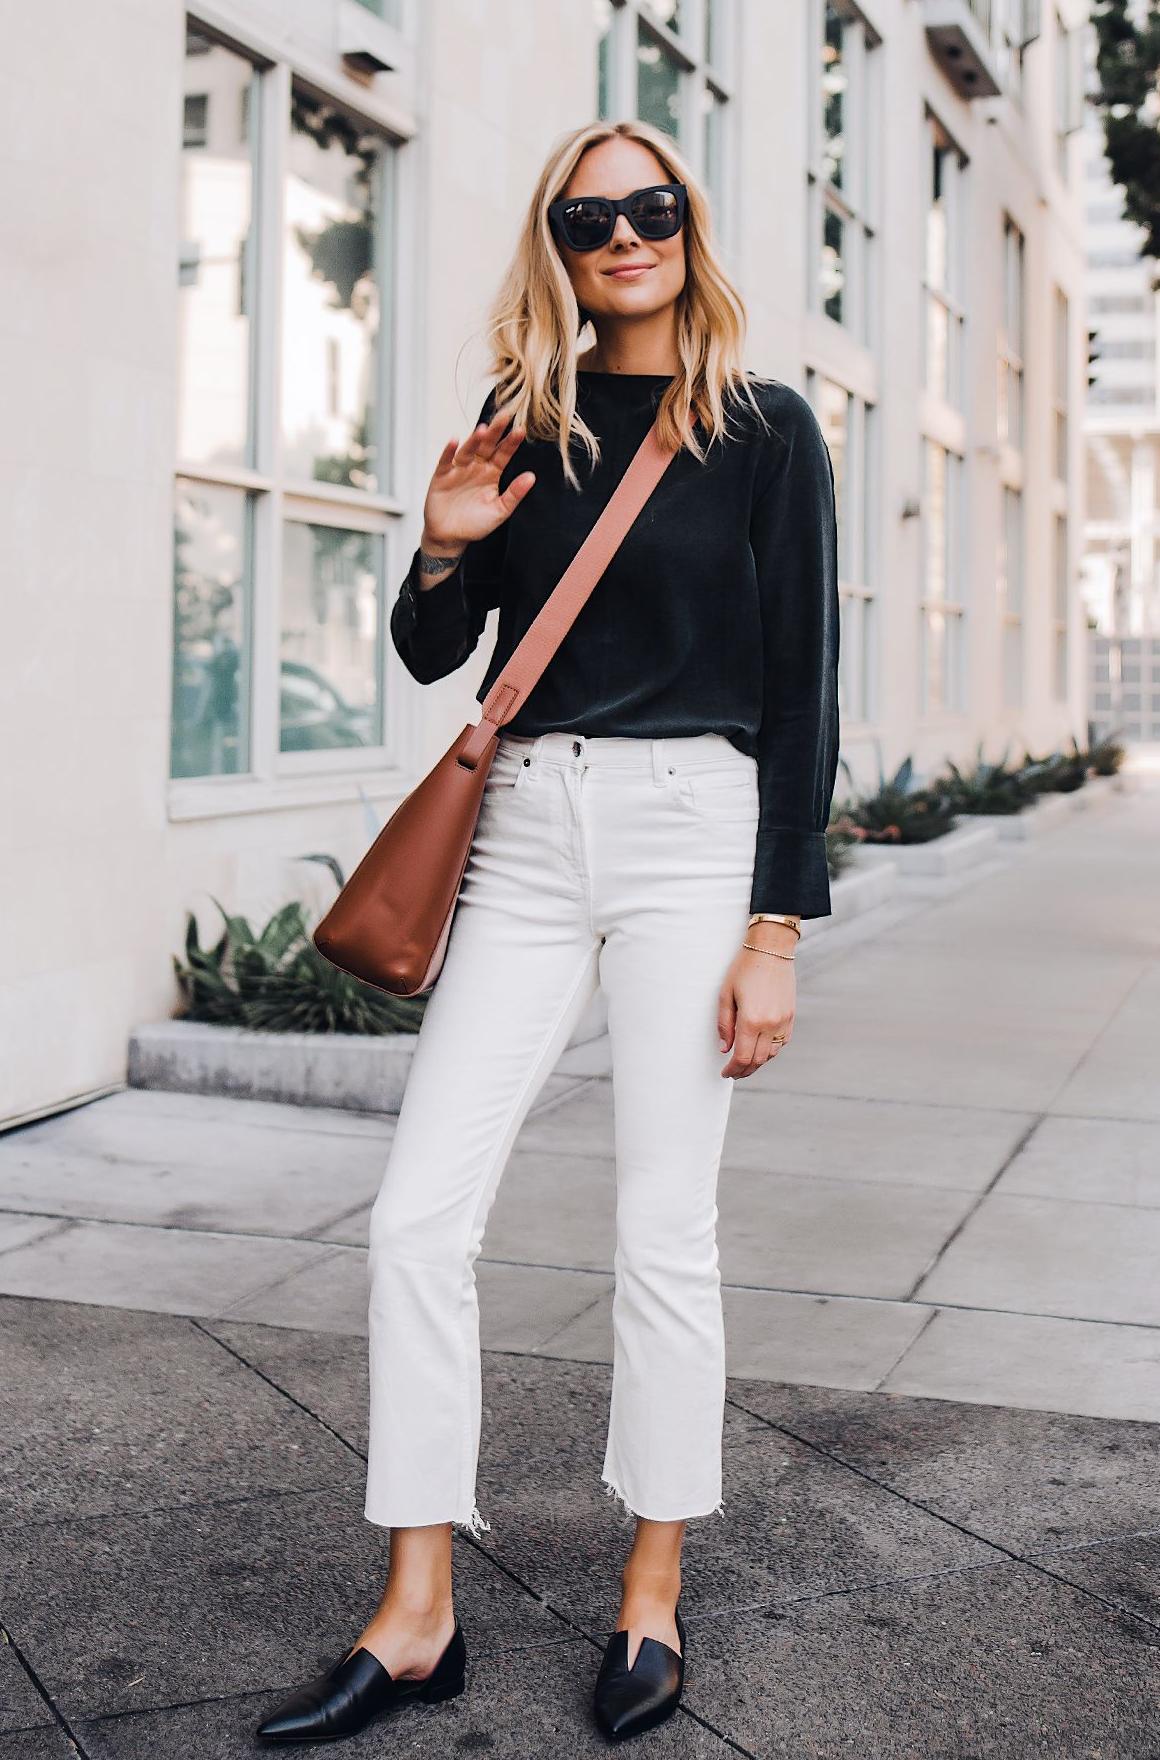 White Jeans For Ladies: Best Outfit Ideas You Should Try 2022